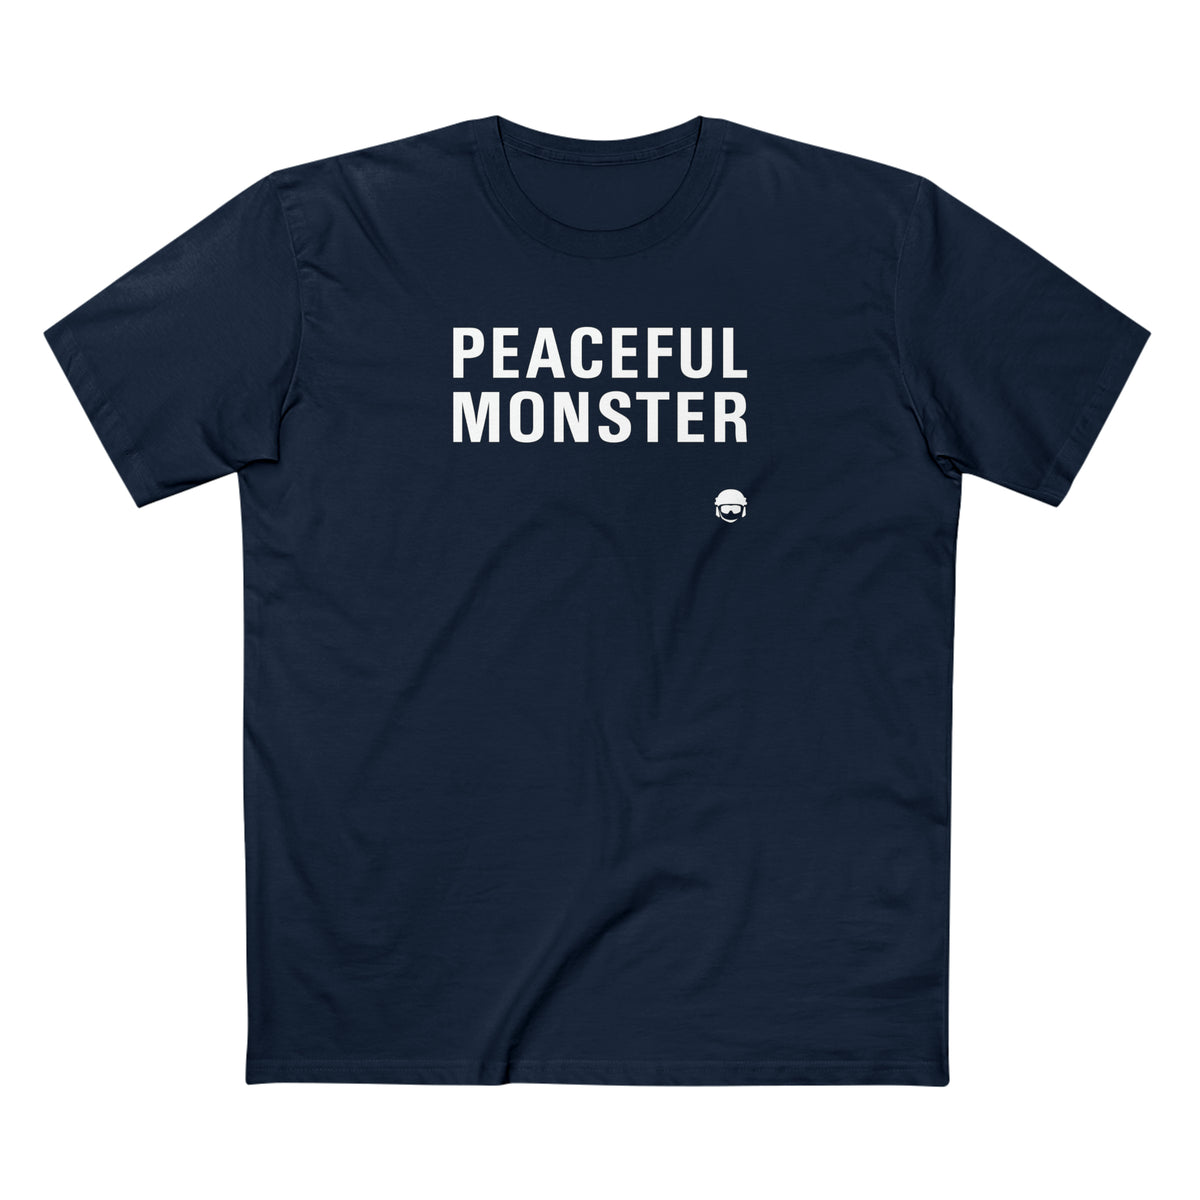 PEACEFUL MONSTER 2 - Cotton Tee